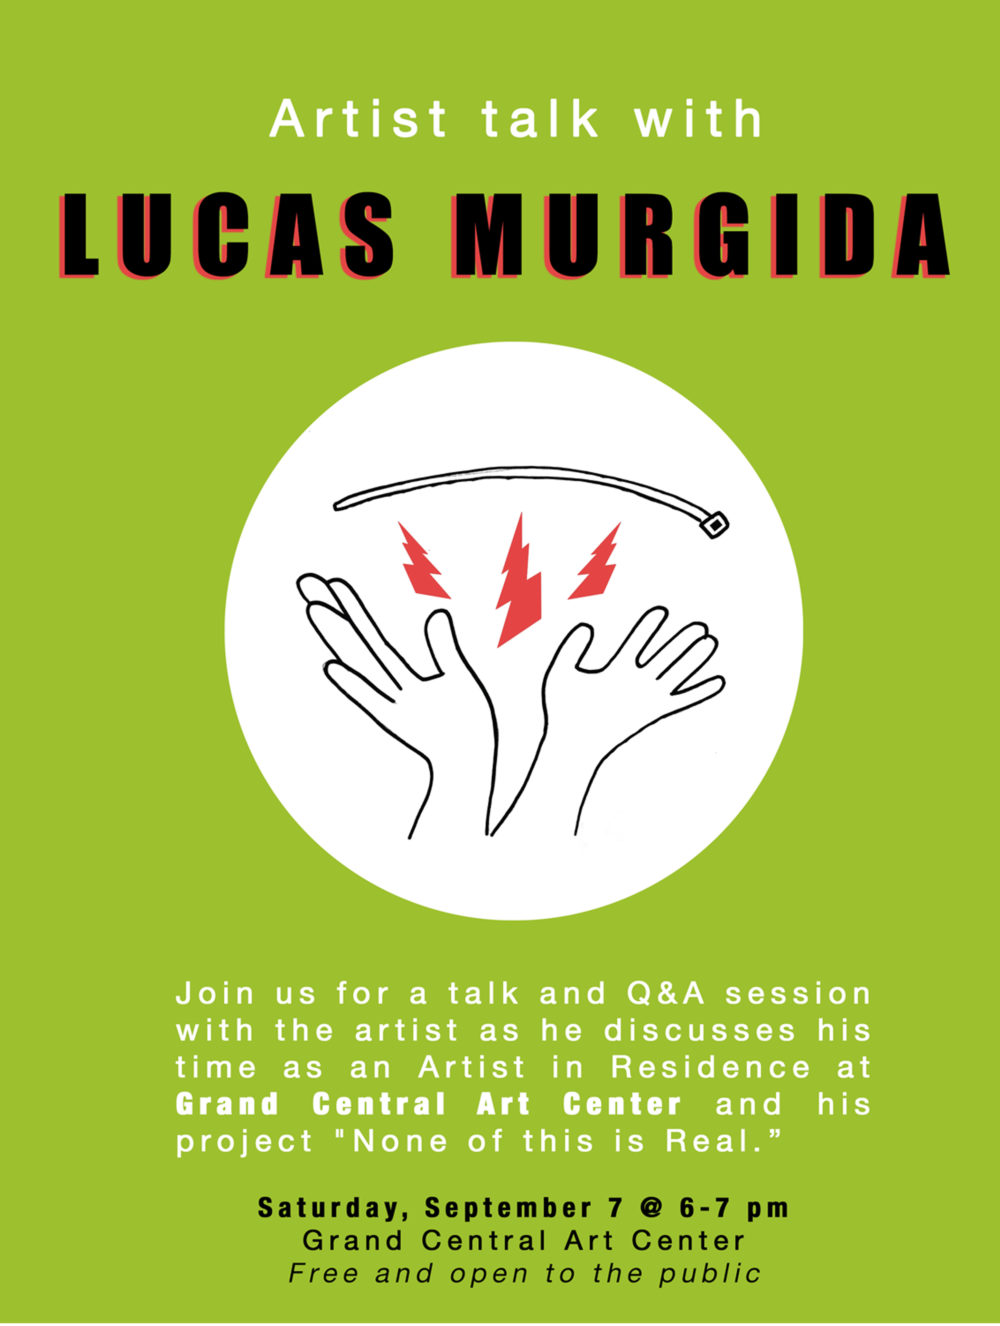 Flyer promoting the artist talk with Lucas Murgida